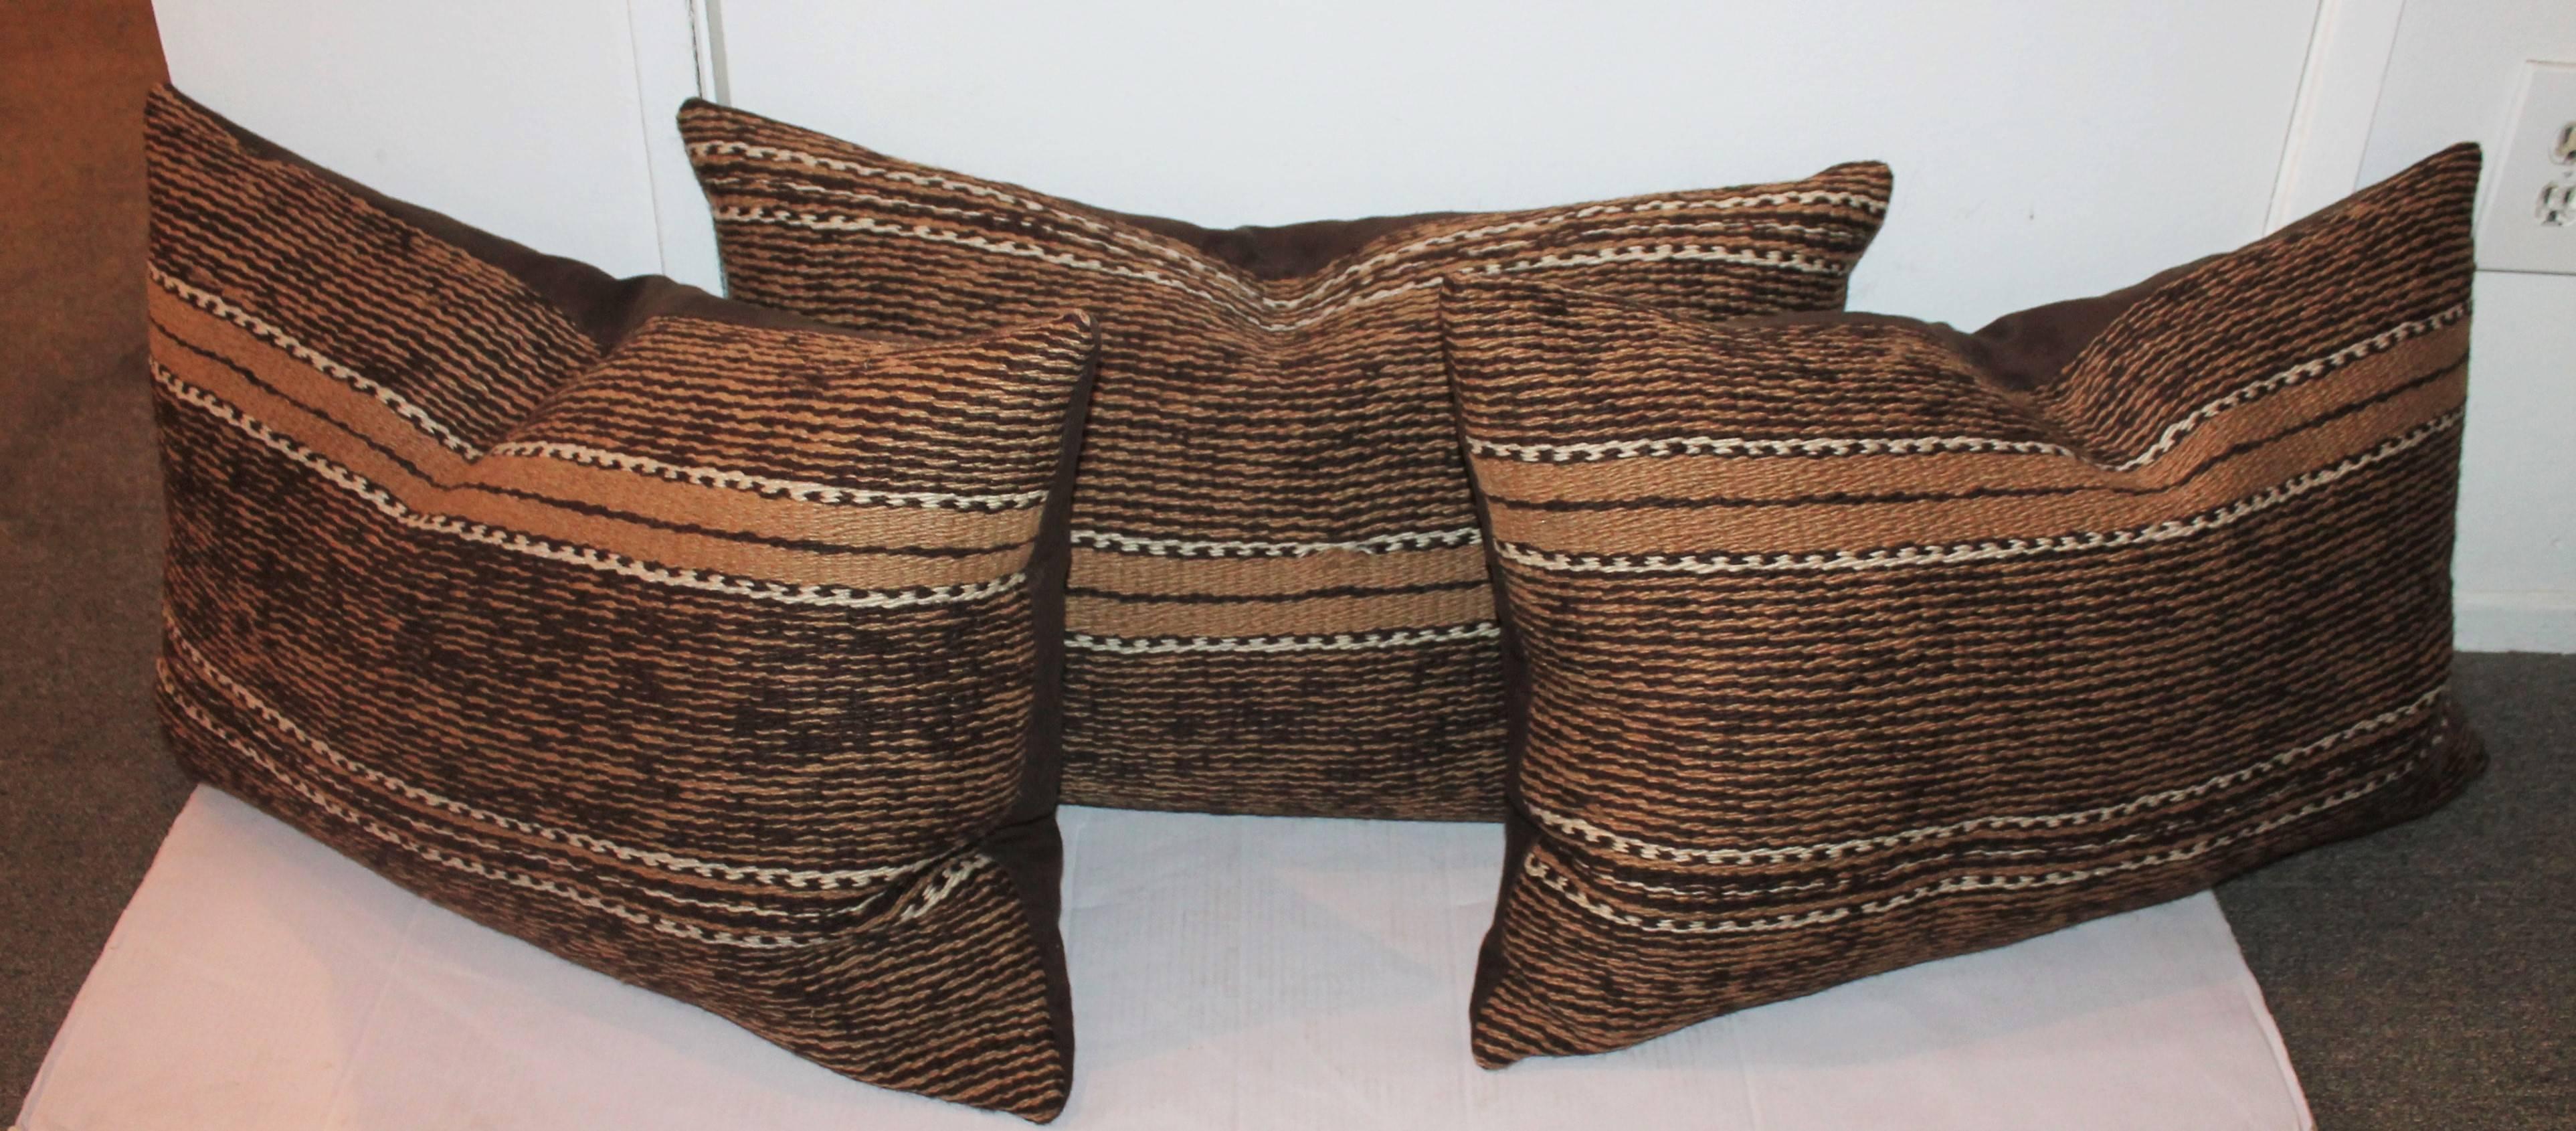 These handwoven pillows are from a large saddle blanket. The weaving is in great as found condition and has brown cotton linen backing. Sold as a group of three.